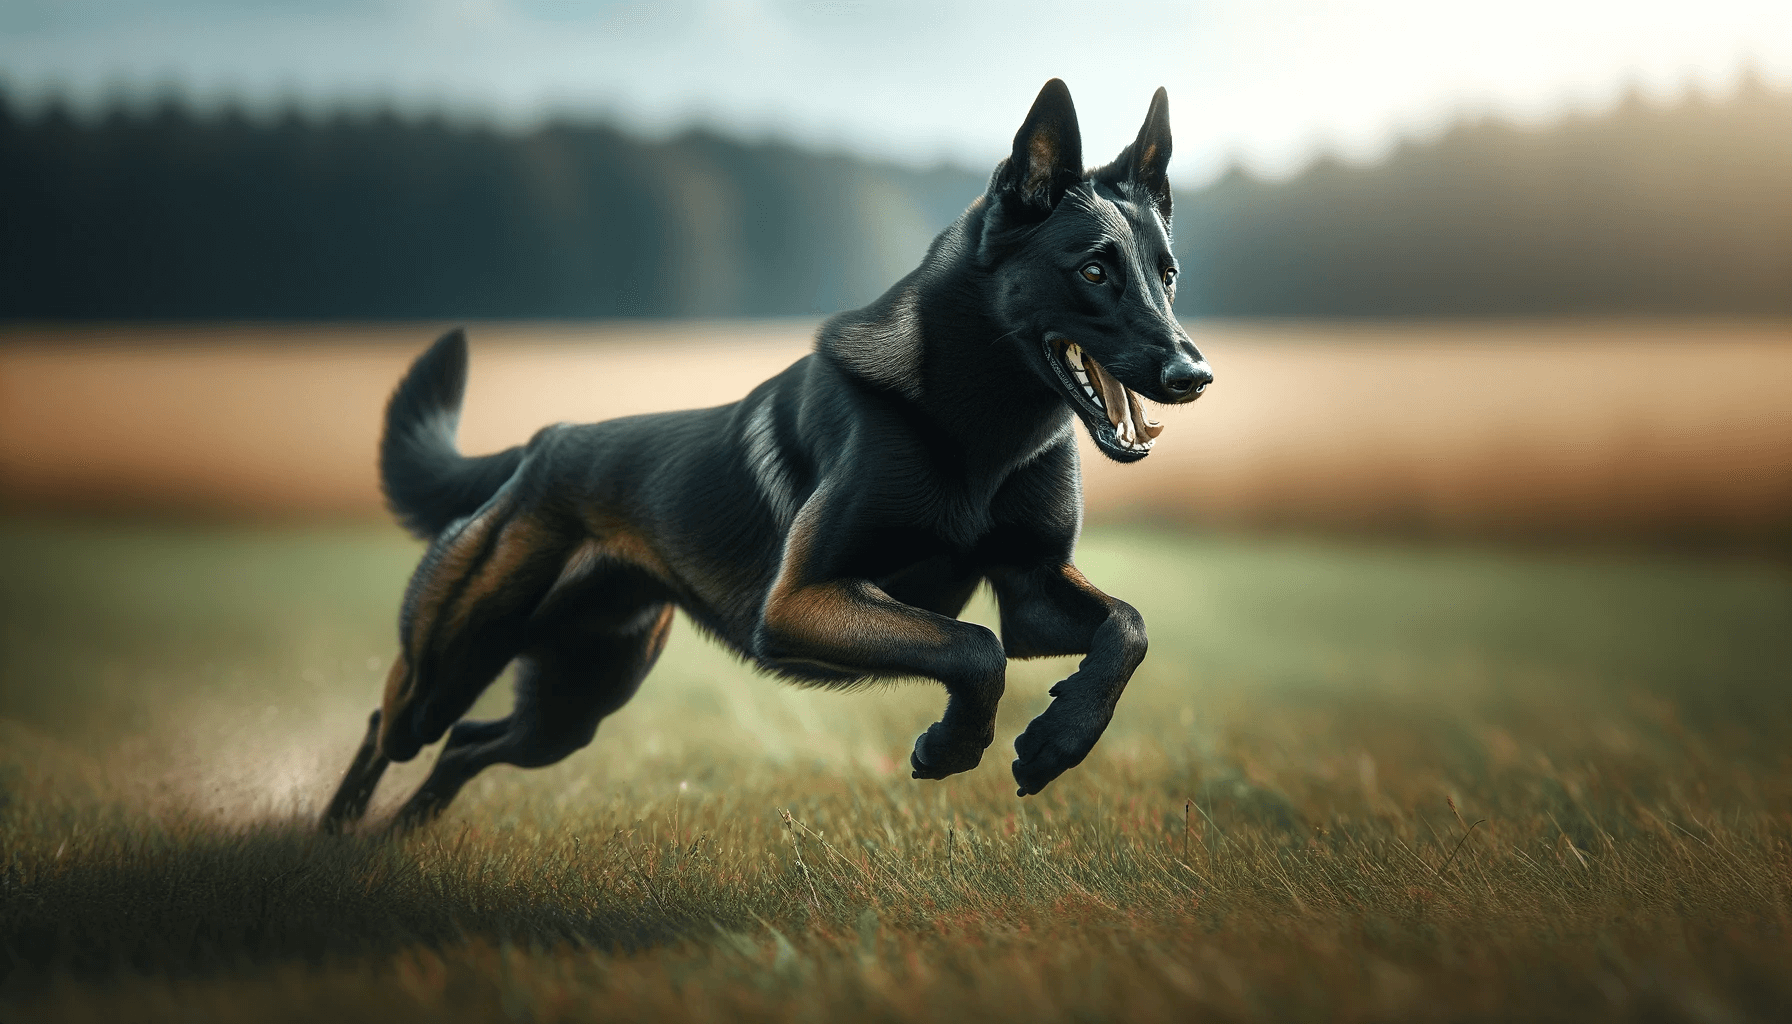 Rare Black Belgian Malinois running across a grassy field with a focused expression, showcasing the breed's athleticism.